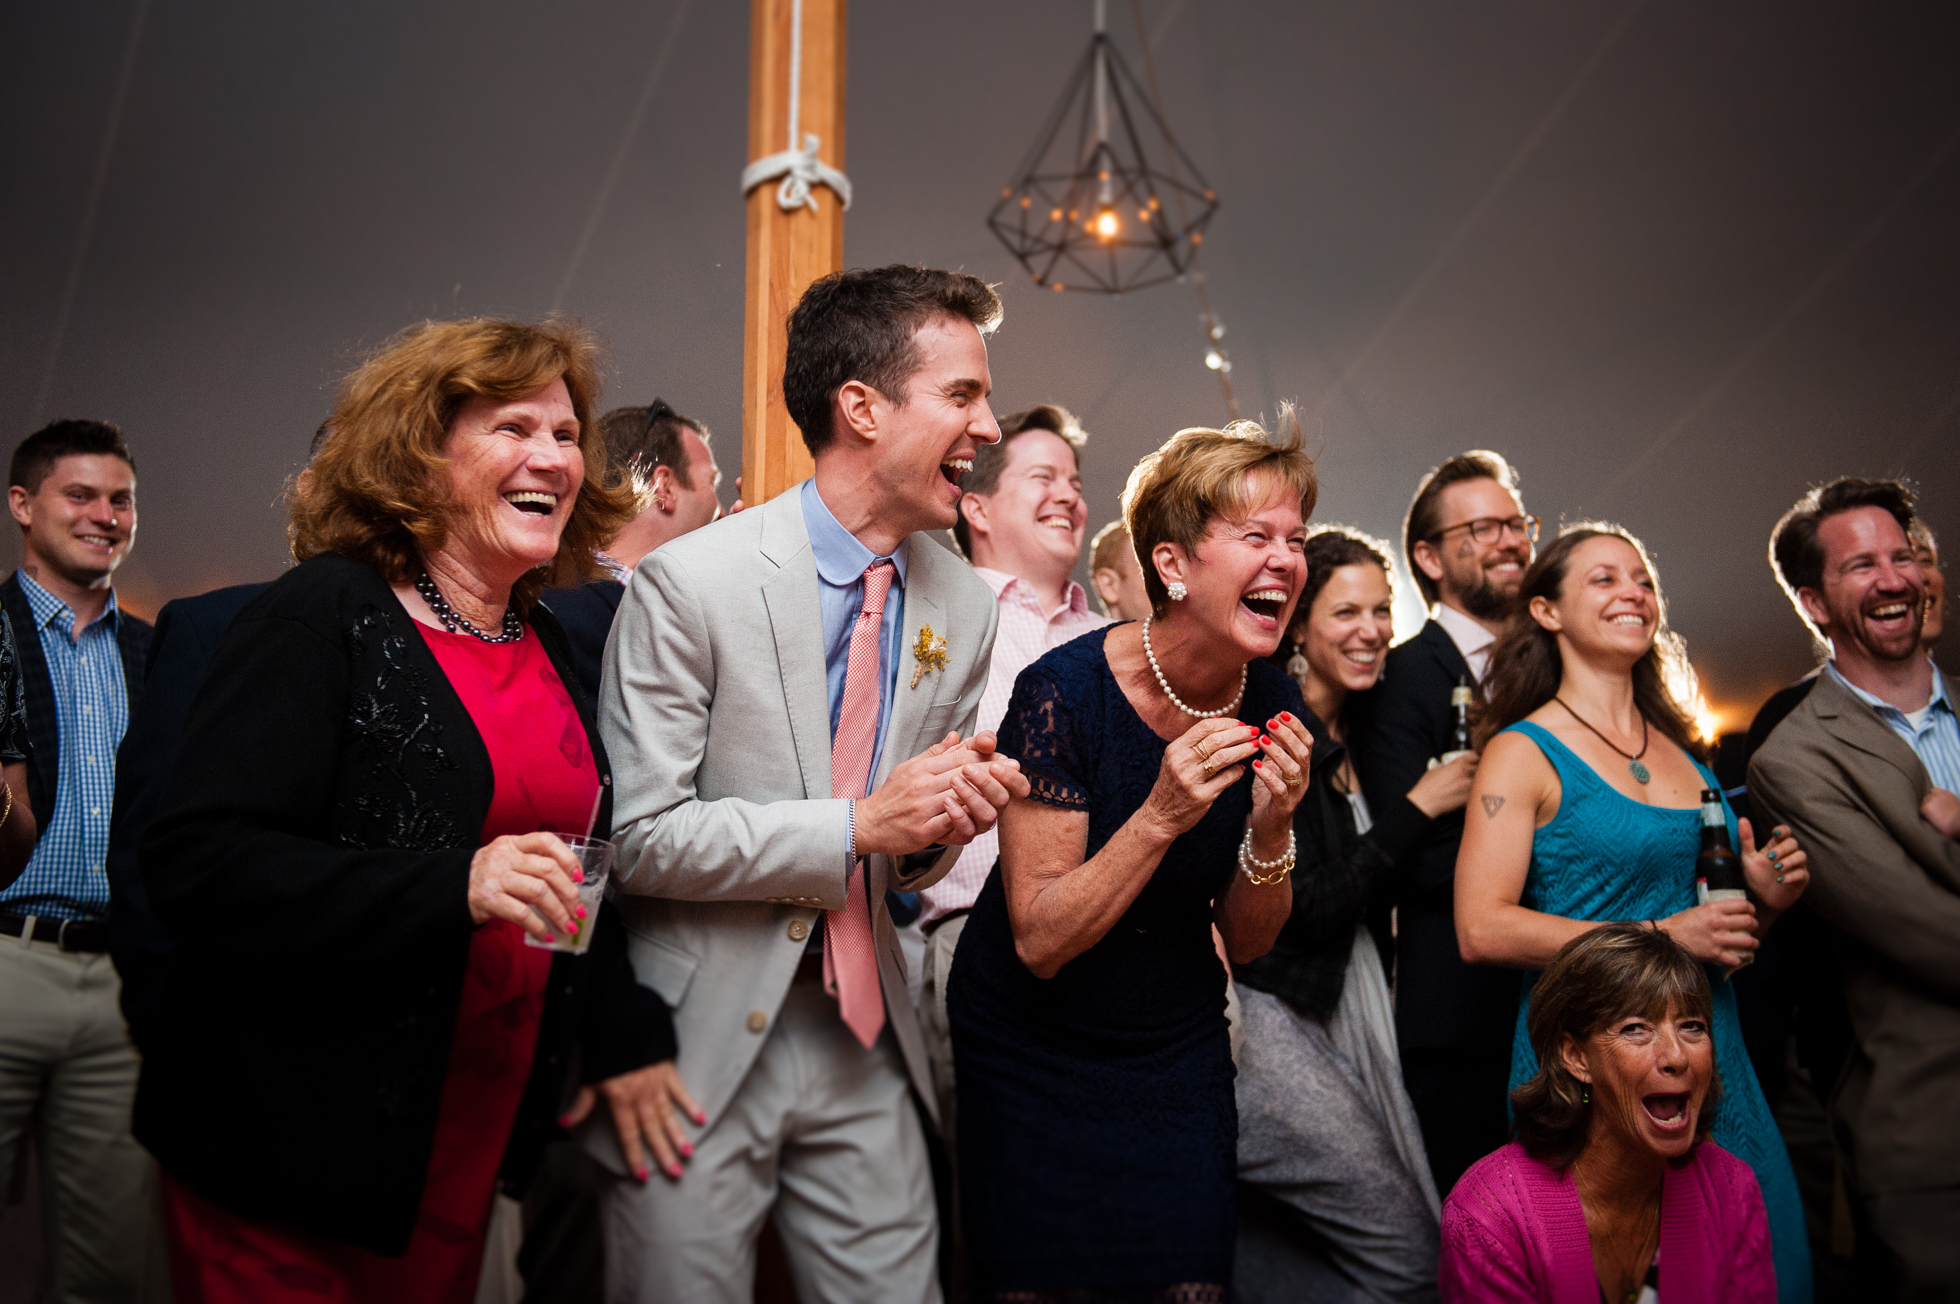 wedding guests laughing at dancers